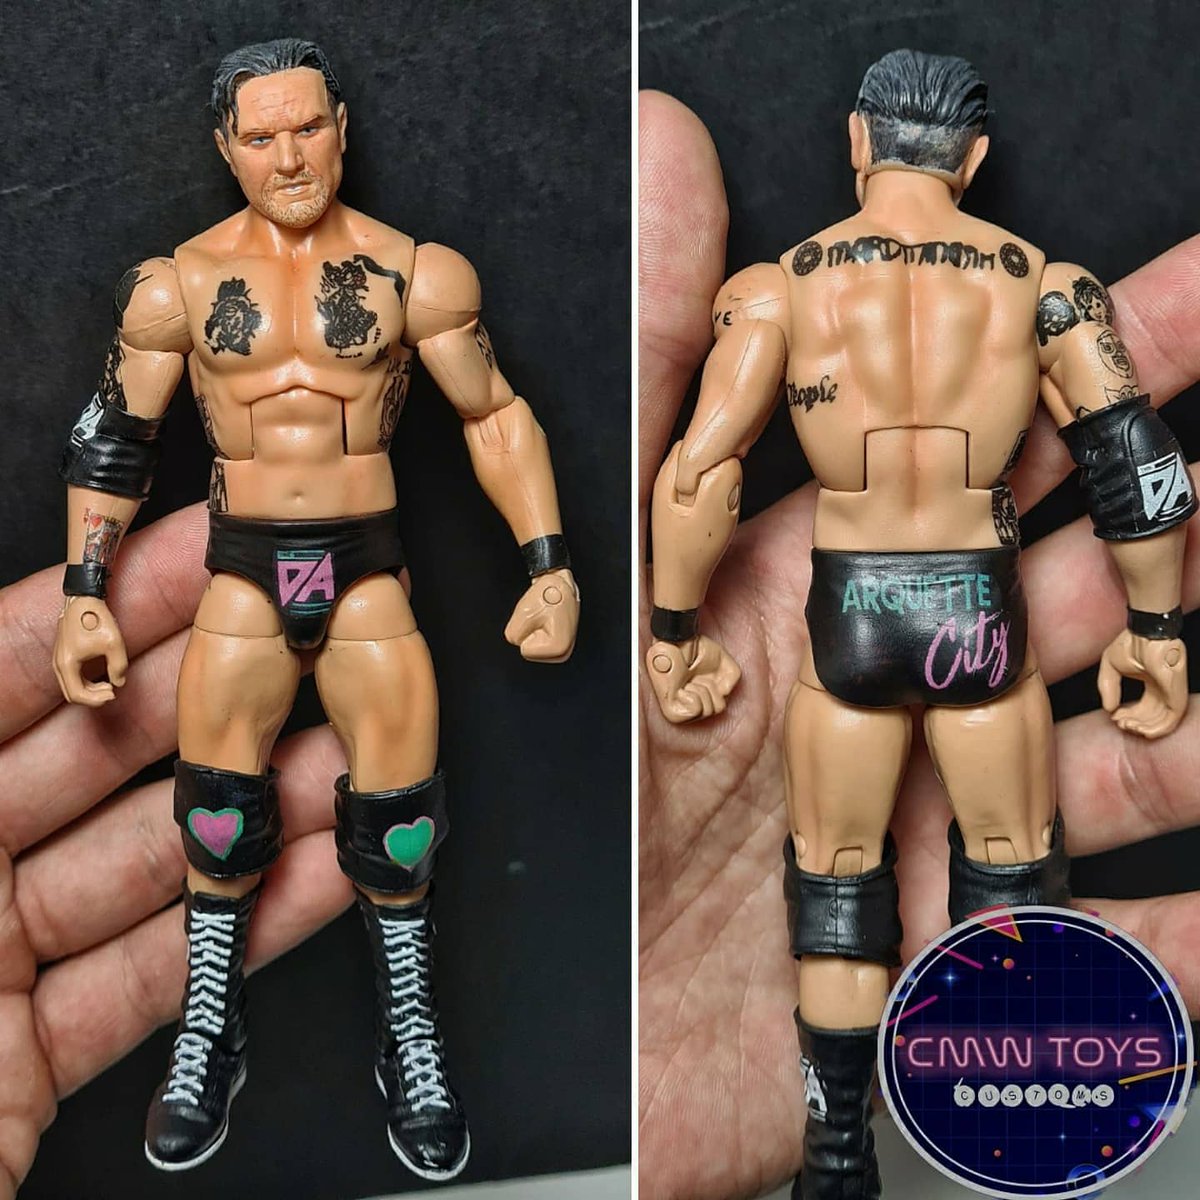 Just finished this @DavidArquette custom. Having recently watched his documentary I needed this for my wrestling collection.